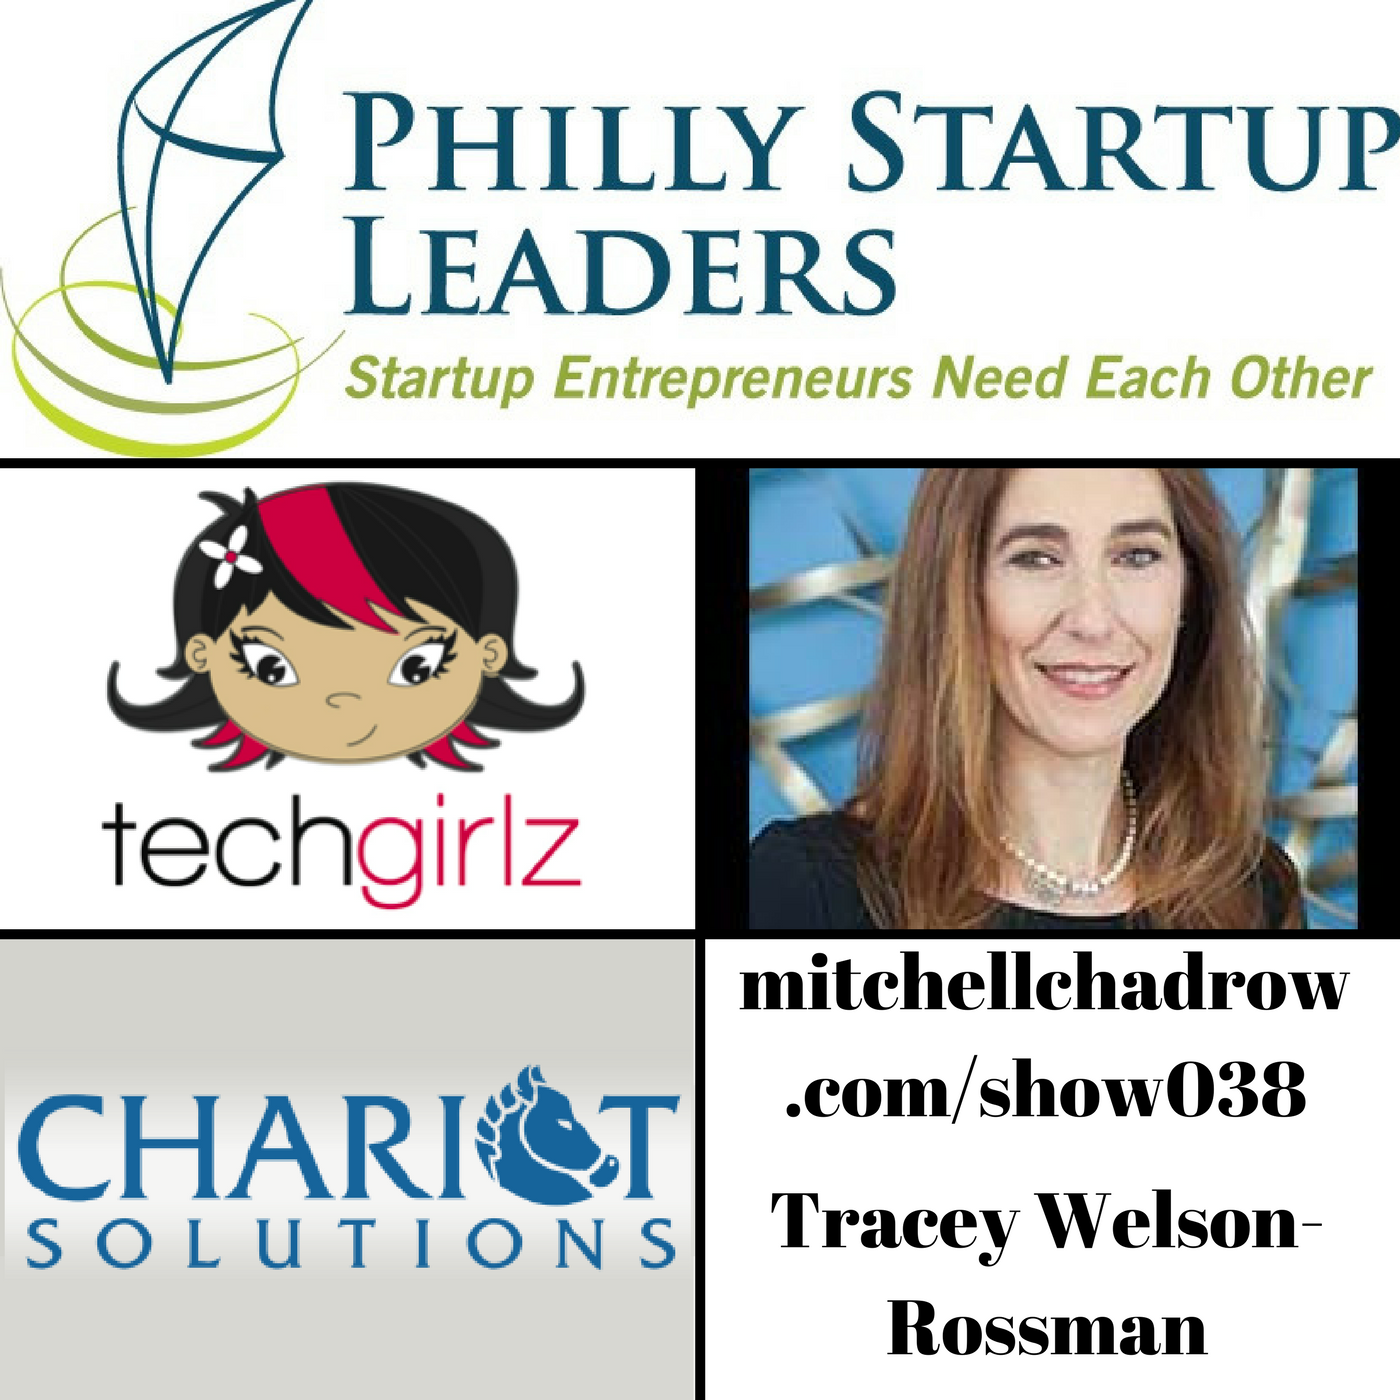 You are currently viewing Girls Technology Leader Techgirlz Founder Tracey Welson Rossman Listenup Show 038 Startup Entrepreneur Podcast